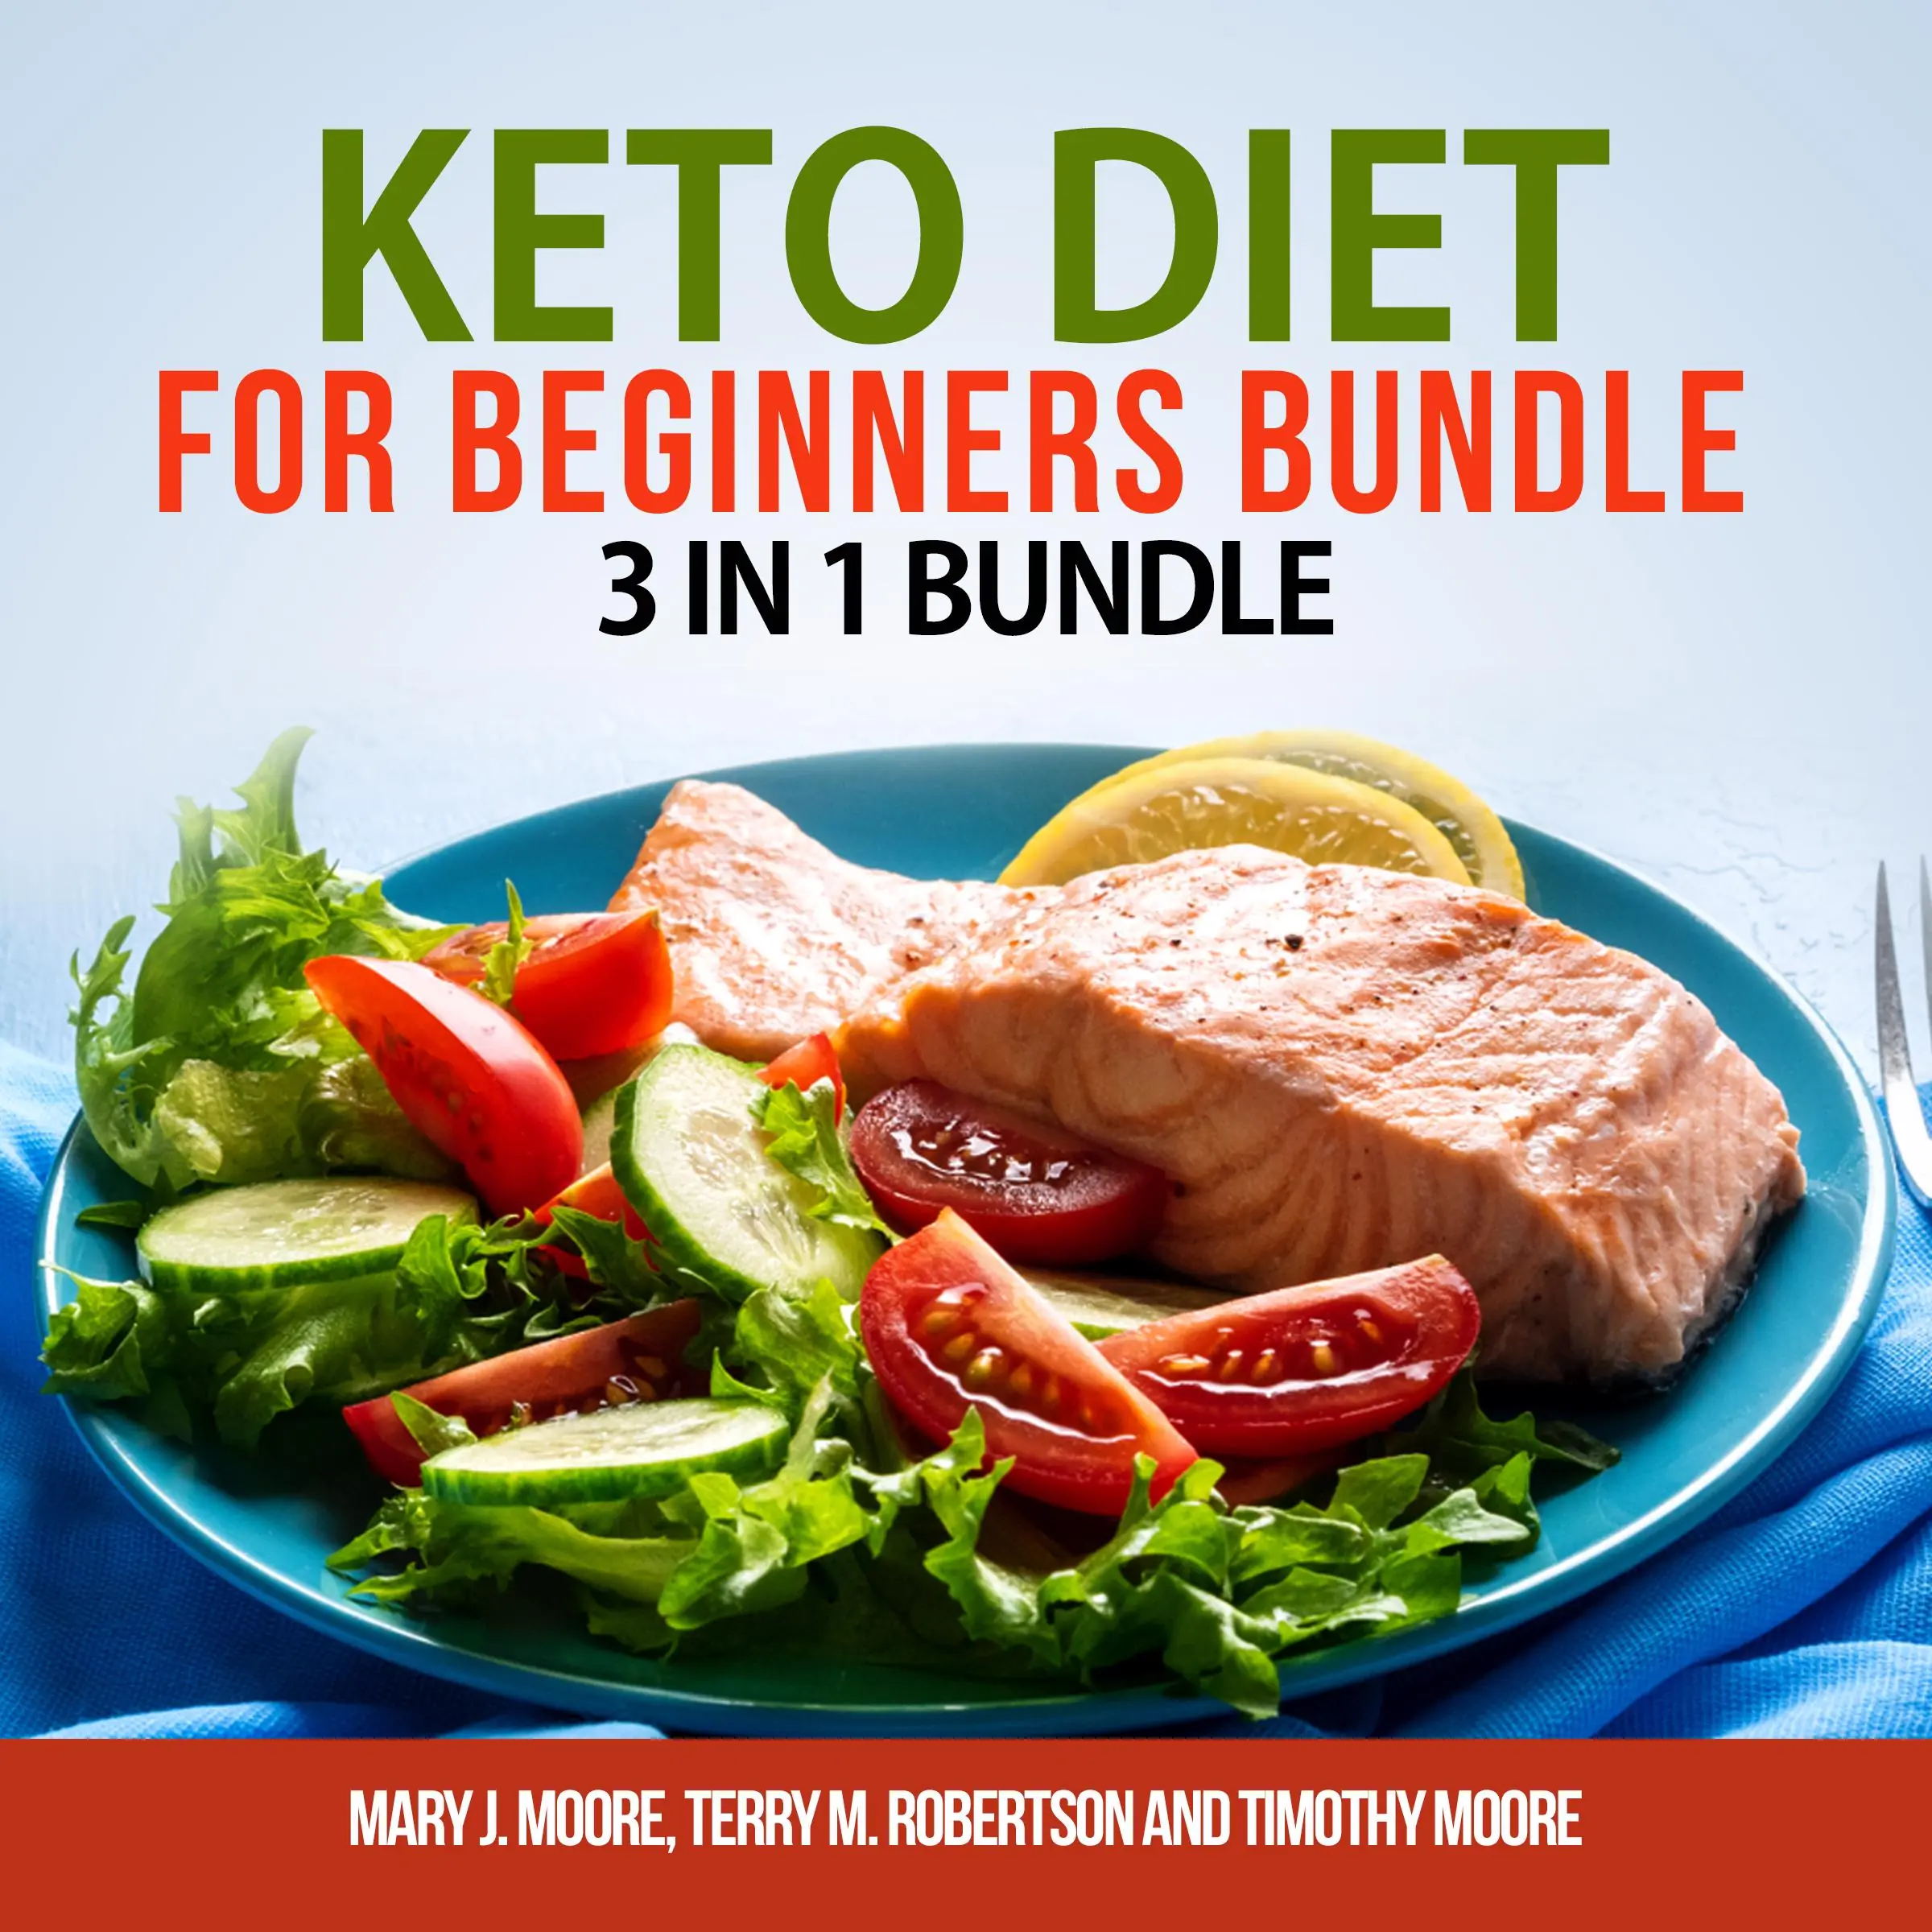 Keto Diet for Beginners Bundle: 3 in 1 Bundle, Keto Weight Loss, Keto Cookbook, Keto Diet for Beginners Audiobook by Terry M. Robertson and Timothy Moore